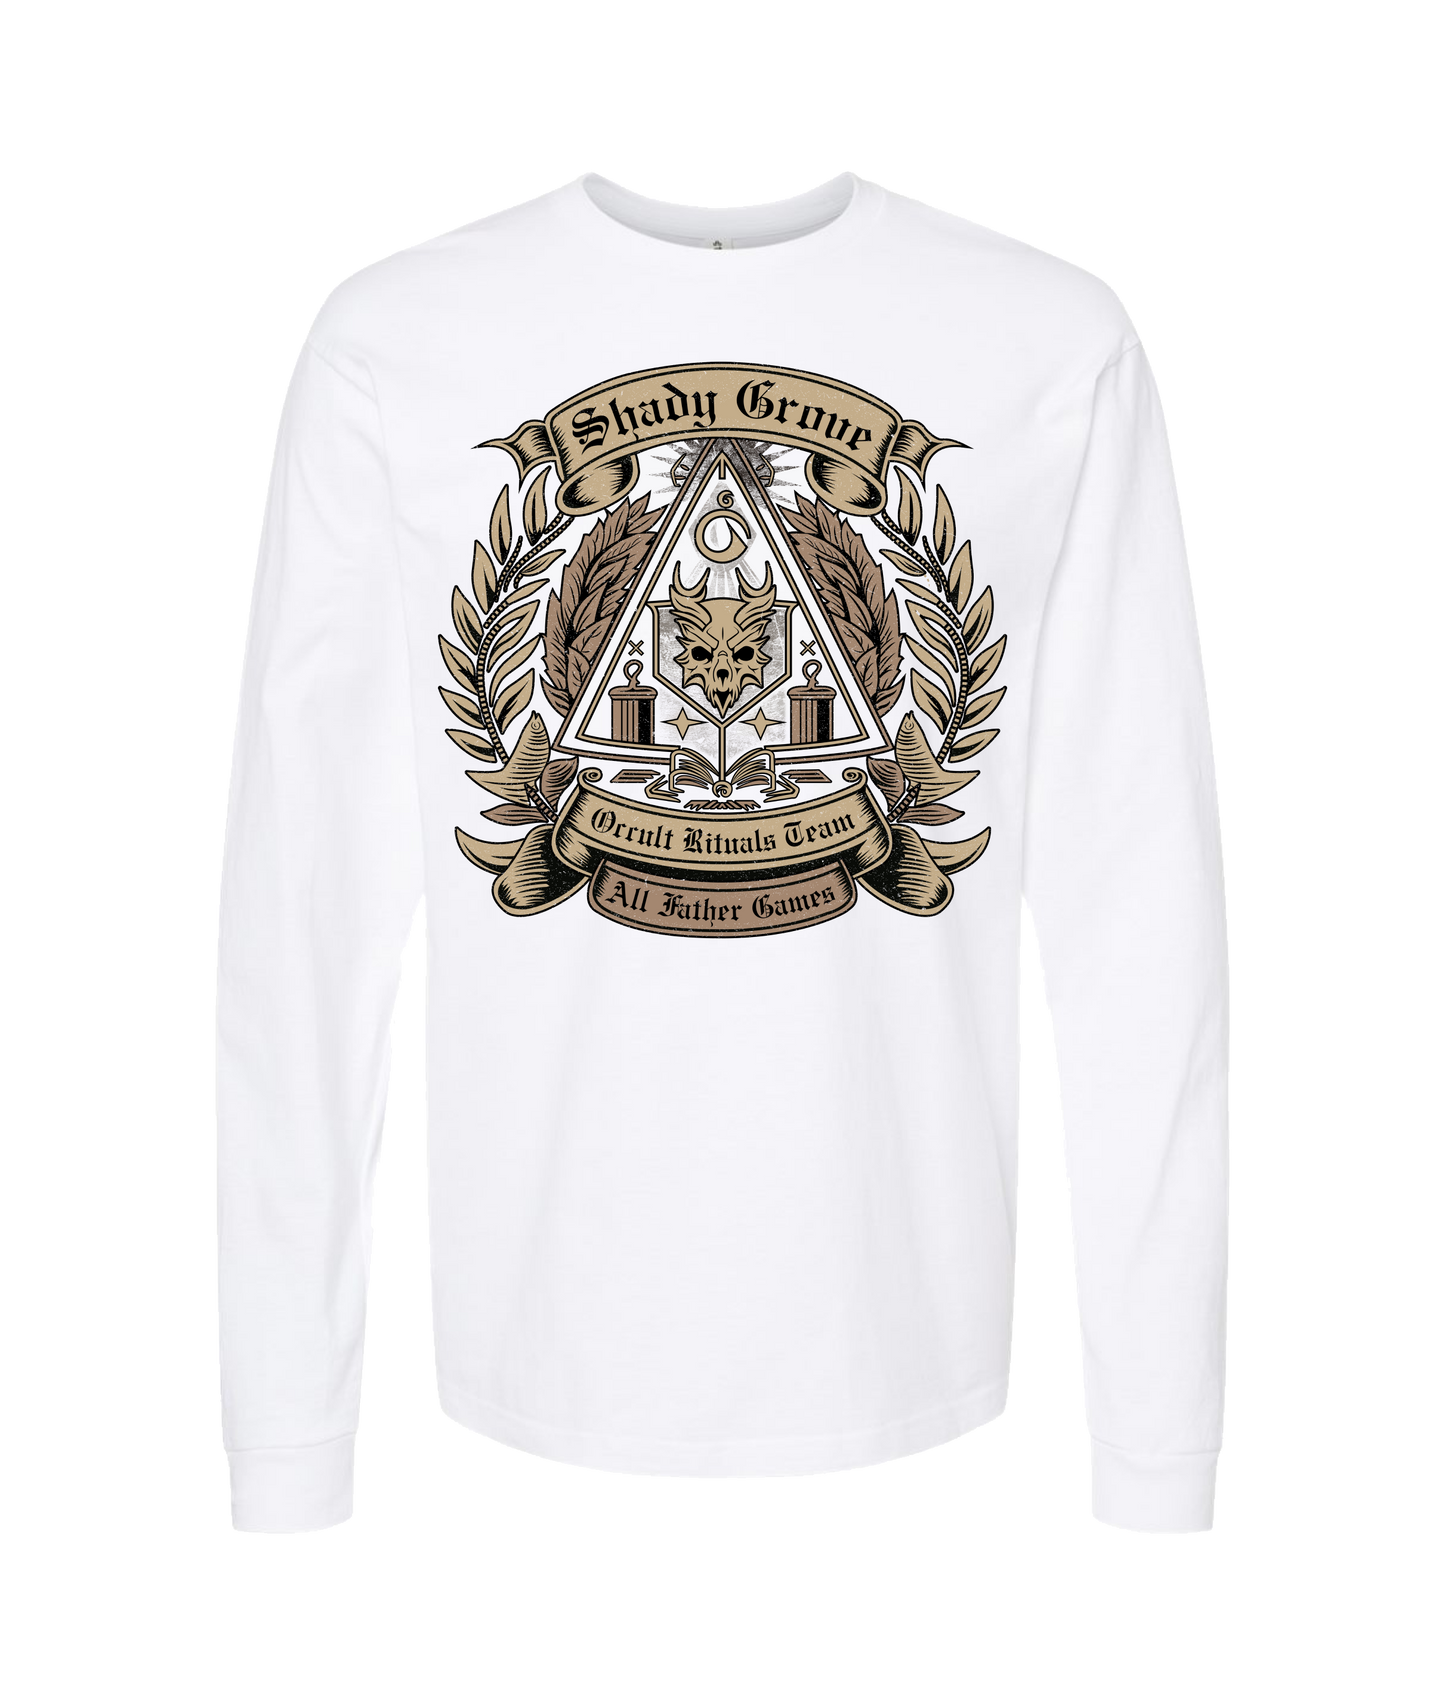 All Father Games - SHADY GROVE - White Long Sleeve T